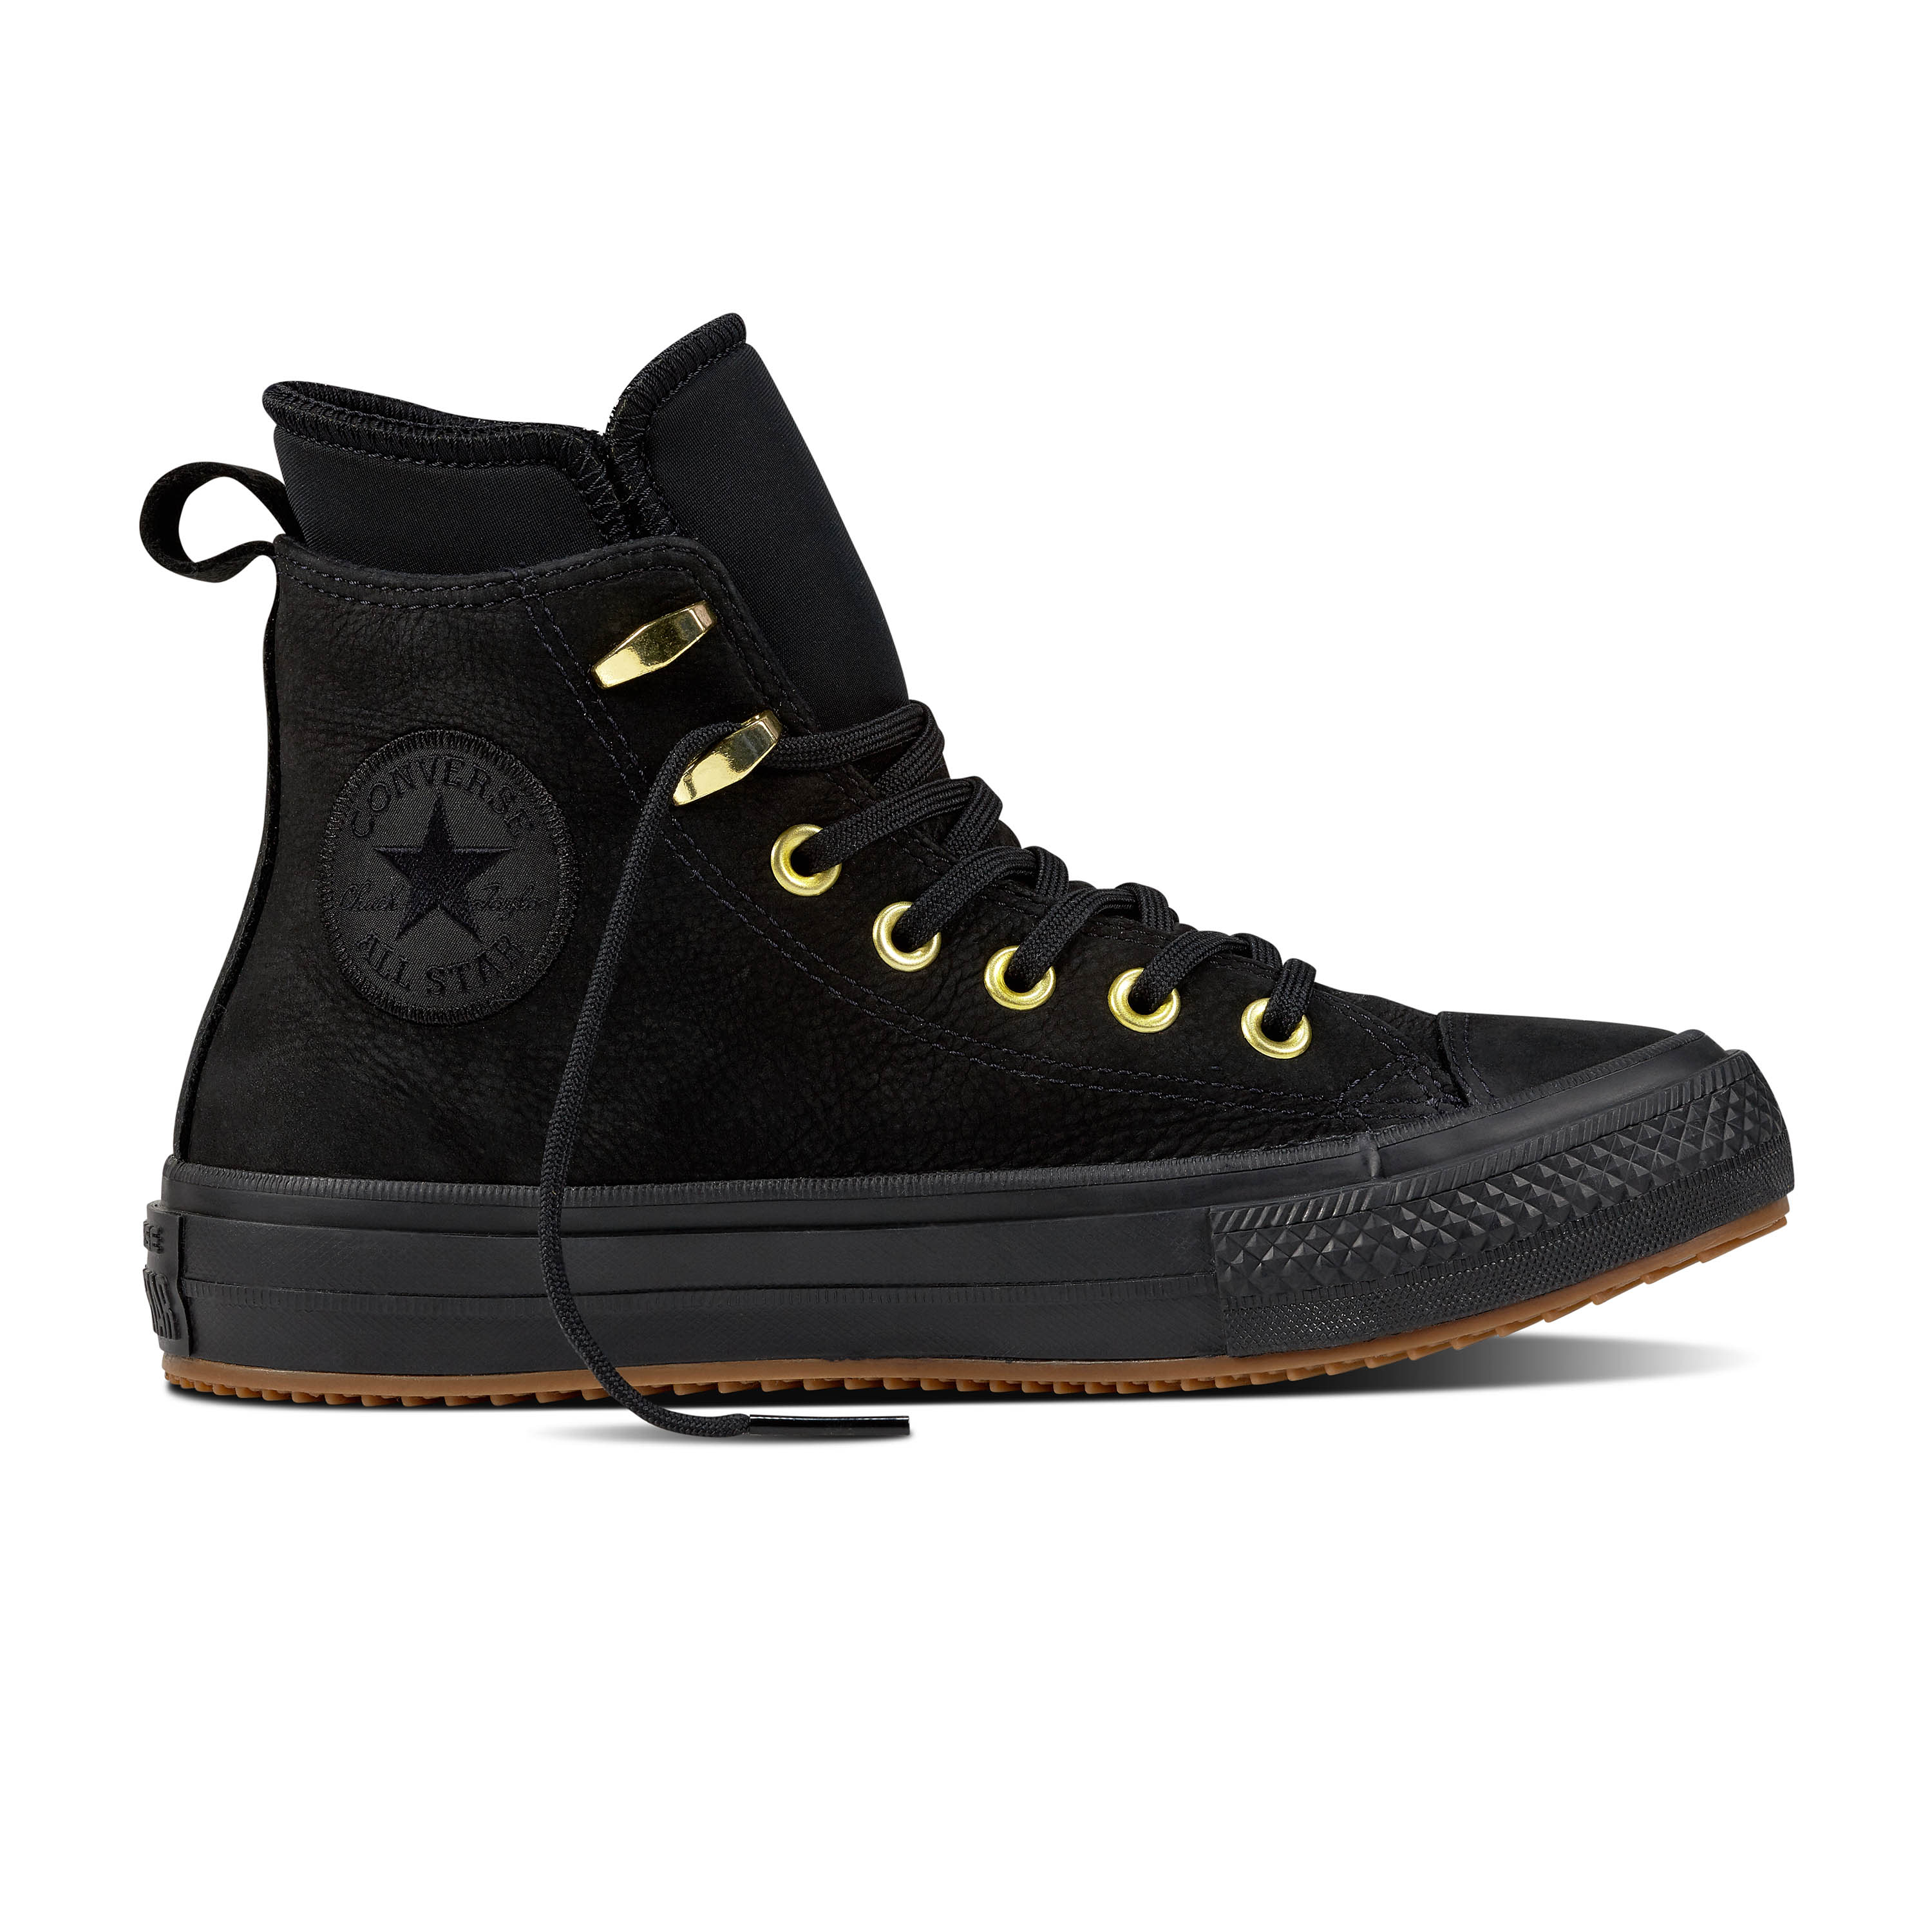 Converse Launches Counter Climate Nubuck Boot Collection